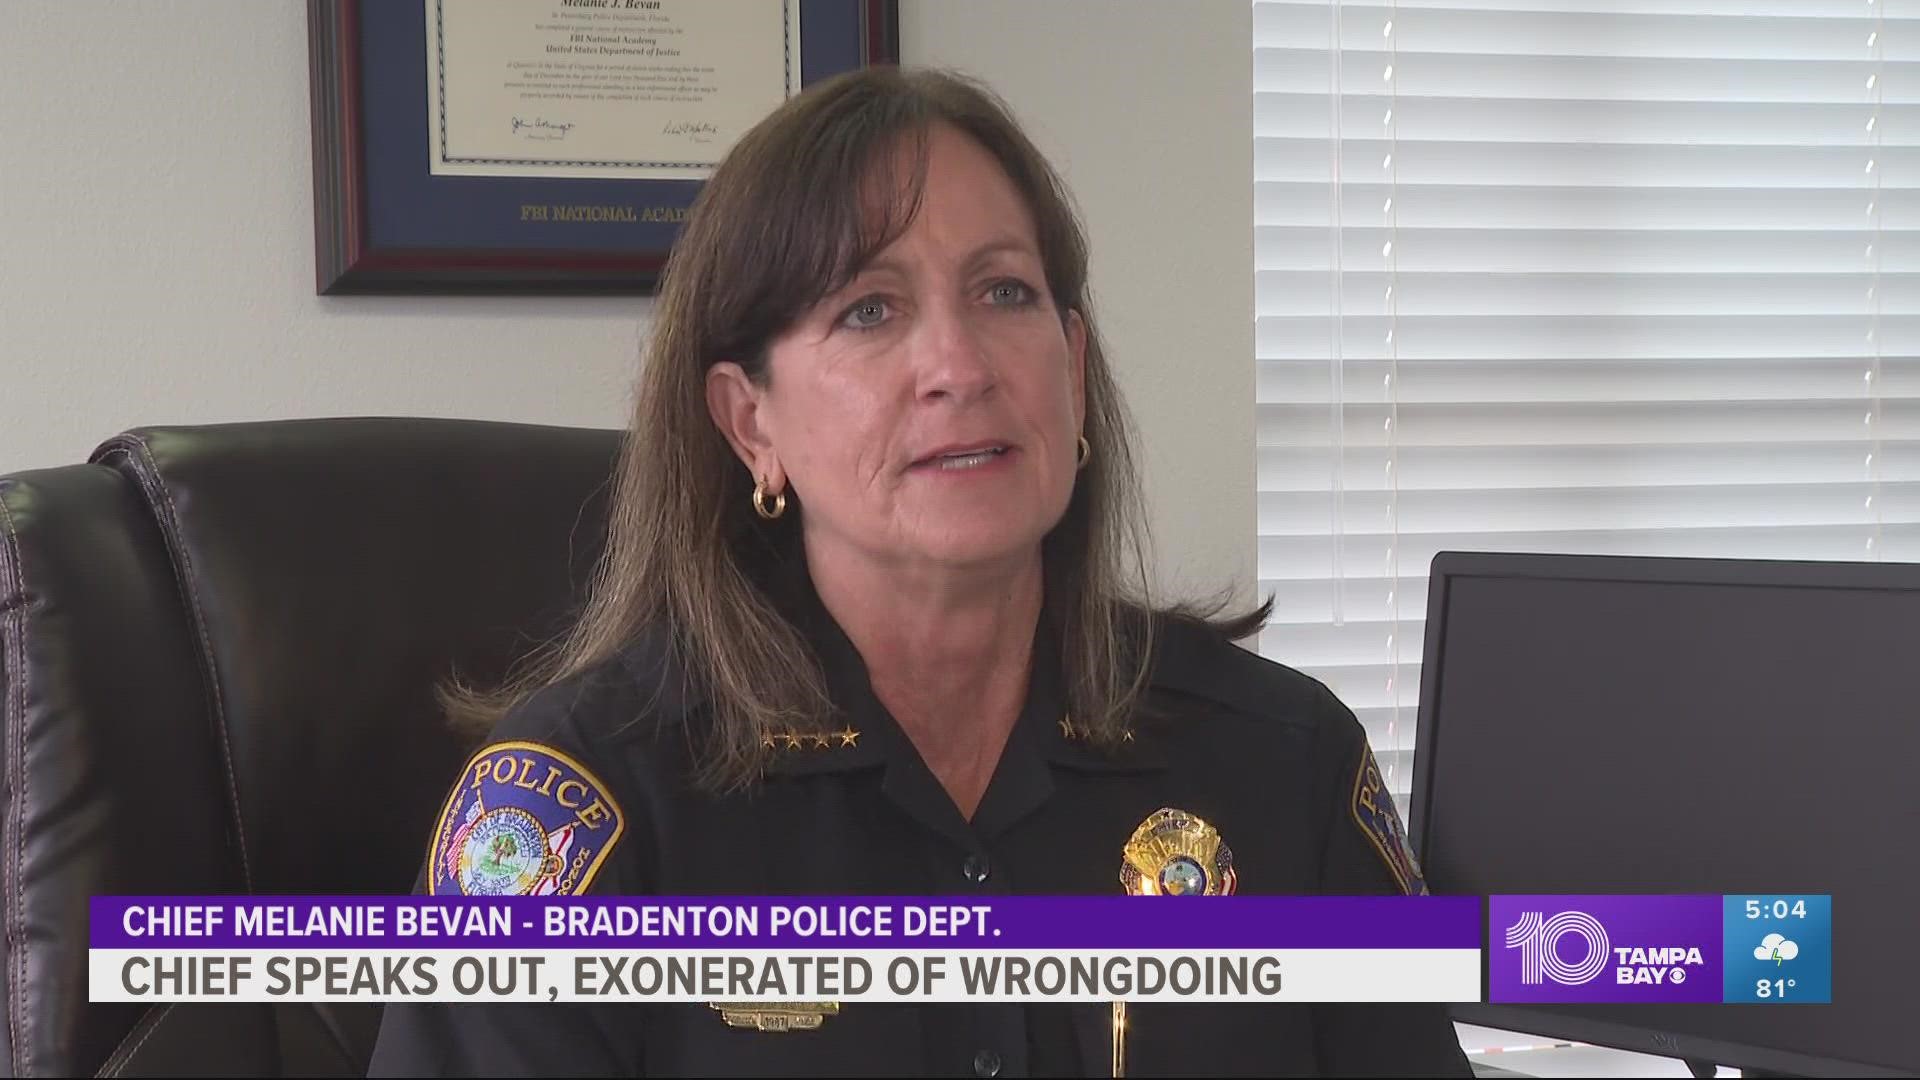 The investigation of the police chief began last month when the mayor of Bradenton requested a retired judge to look into the allegations.